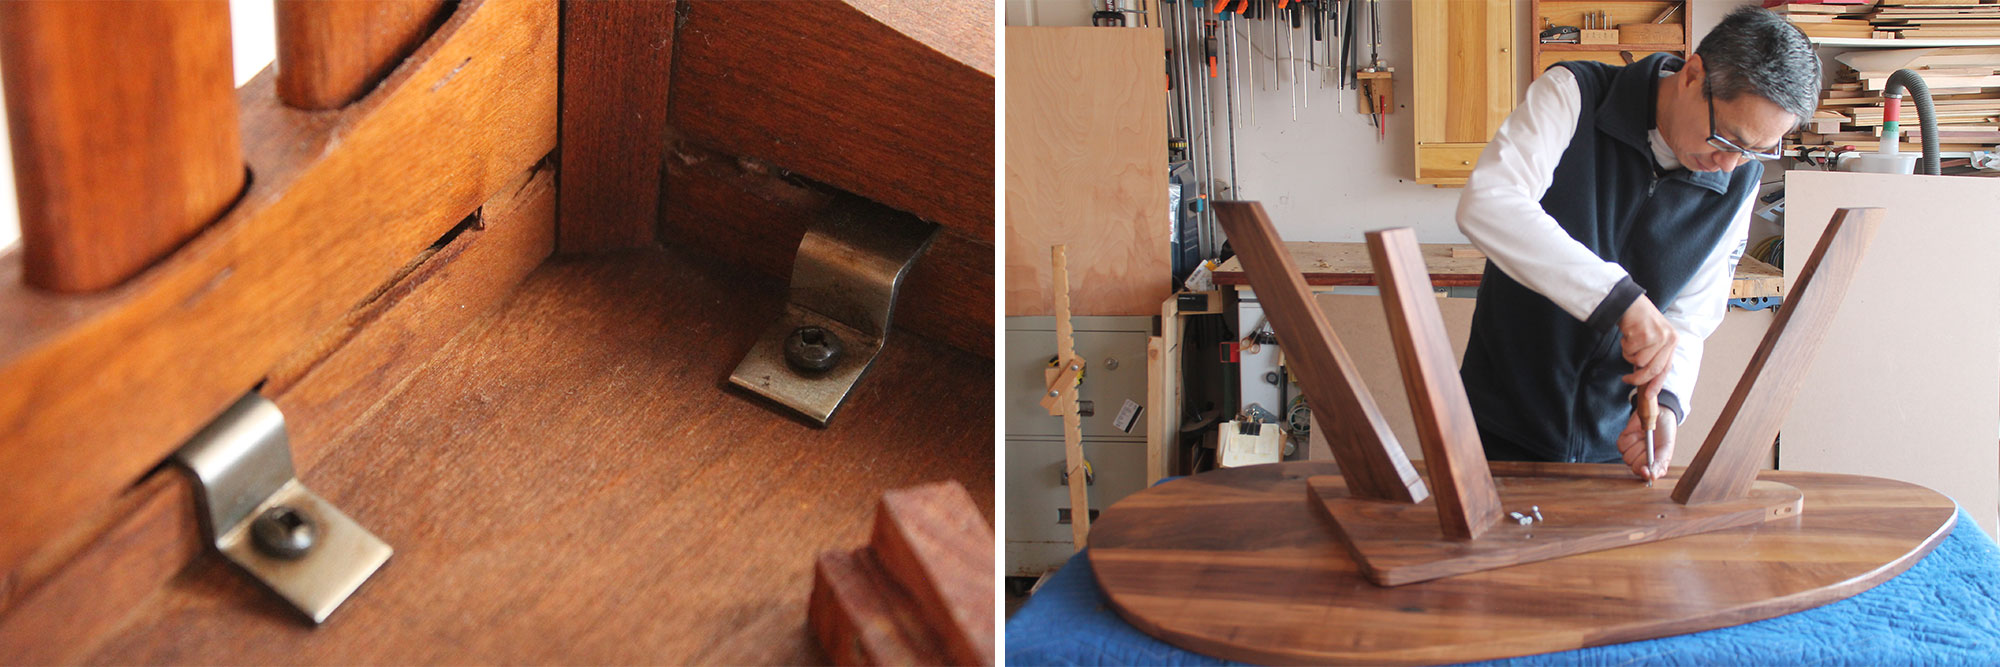 Left: Using Z-clips to attach the tops so they can move across their width. Right: Screwing the table top to its base using elongated holes.